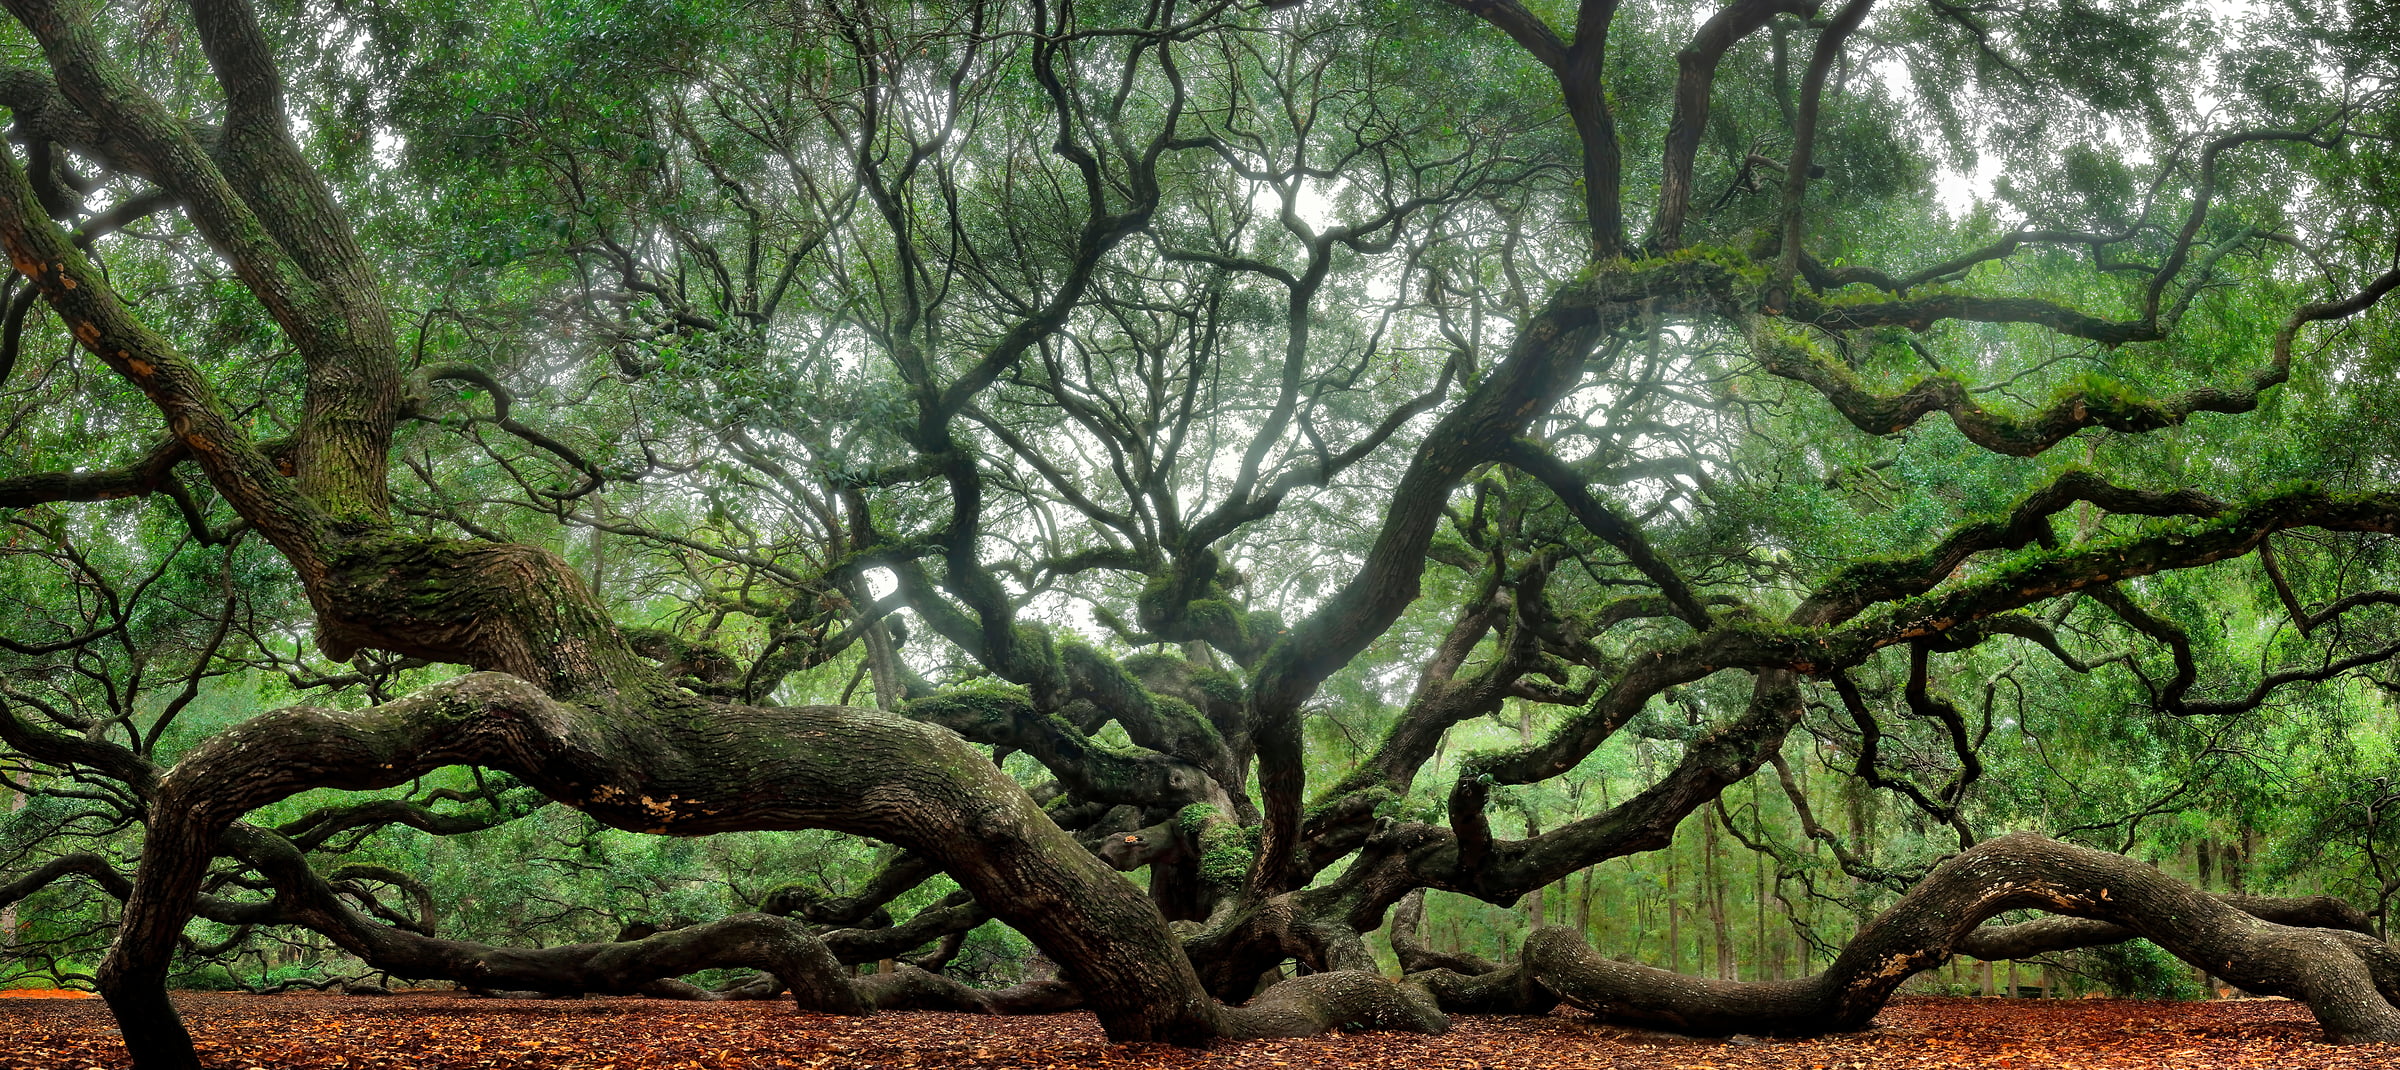 324 megapixels! A very high resolution, large-format VAST photo print of a beautiful tree; photograph created by Phil Crawshay in Angel Oak, Charleston, South Carolina